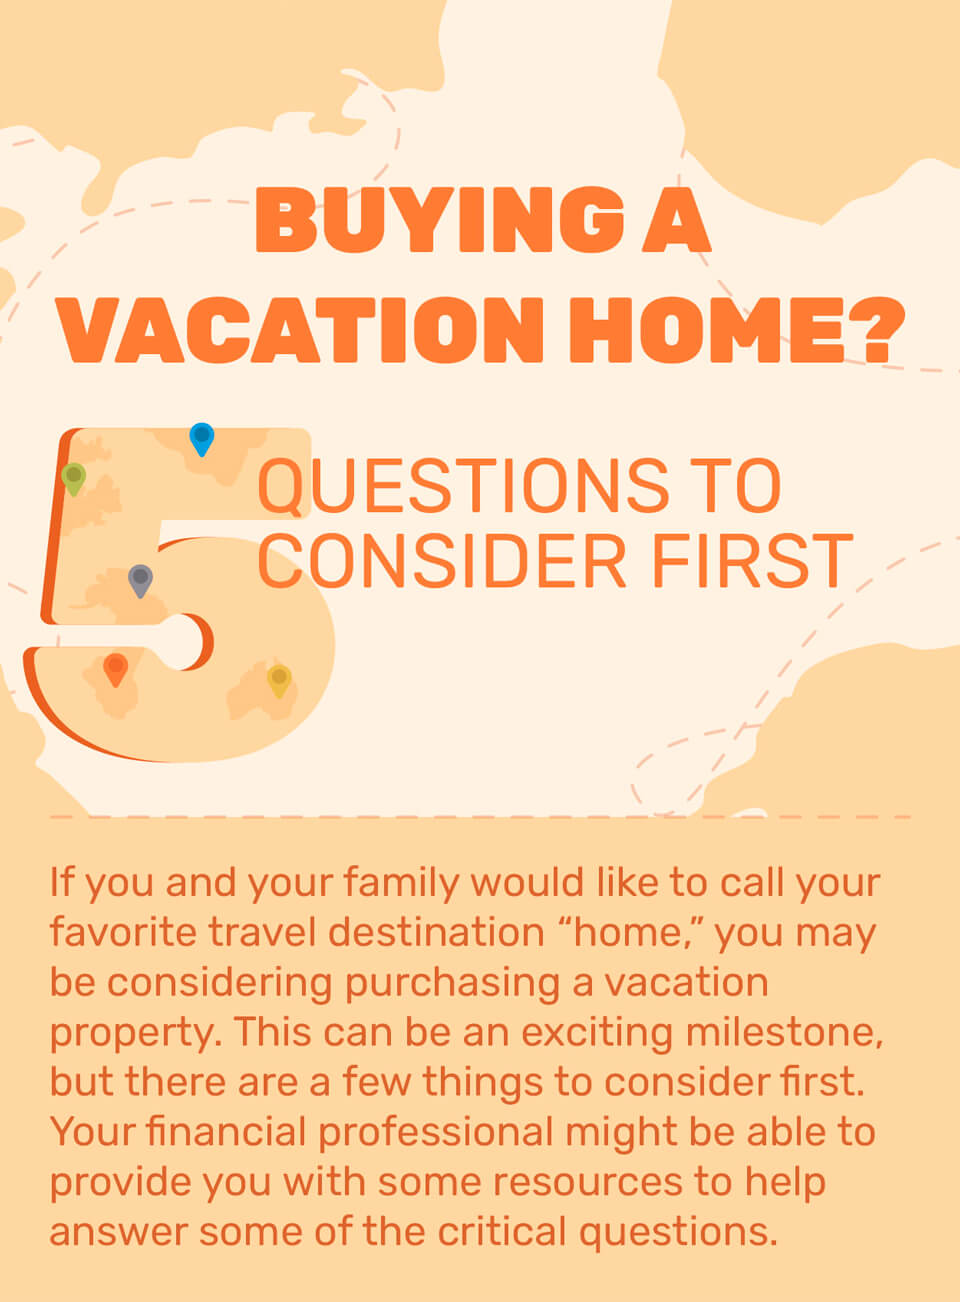 Buying a Vacation Home? 5 Questions to Consider First. If you and your family would like to call your favorite travel destination “home,” you may be considering purchasing a vacation property. This can be an exciting milestone, but there are a few things to consider first. Your financial professional might be able to provide you with some resources to help answer some of the critical questions.